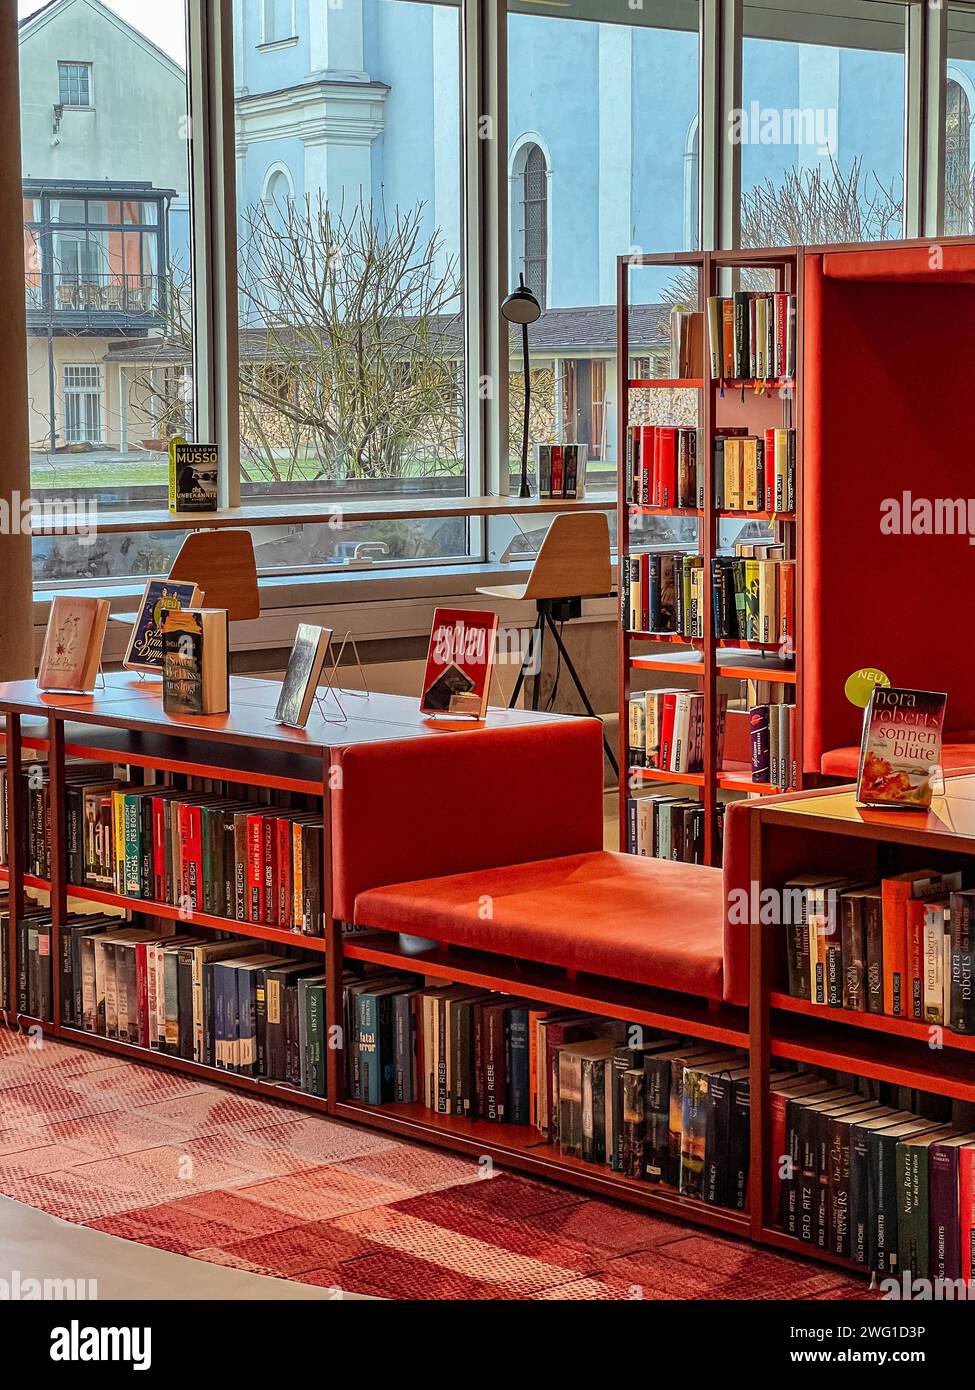 Bookshelves with various books in the city library. Stock Photo